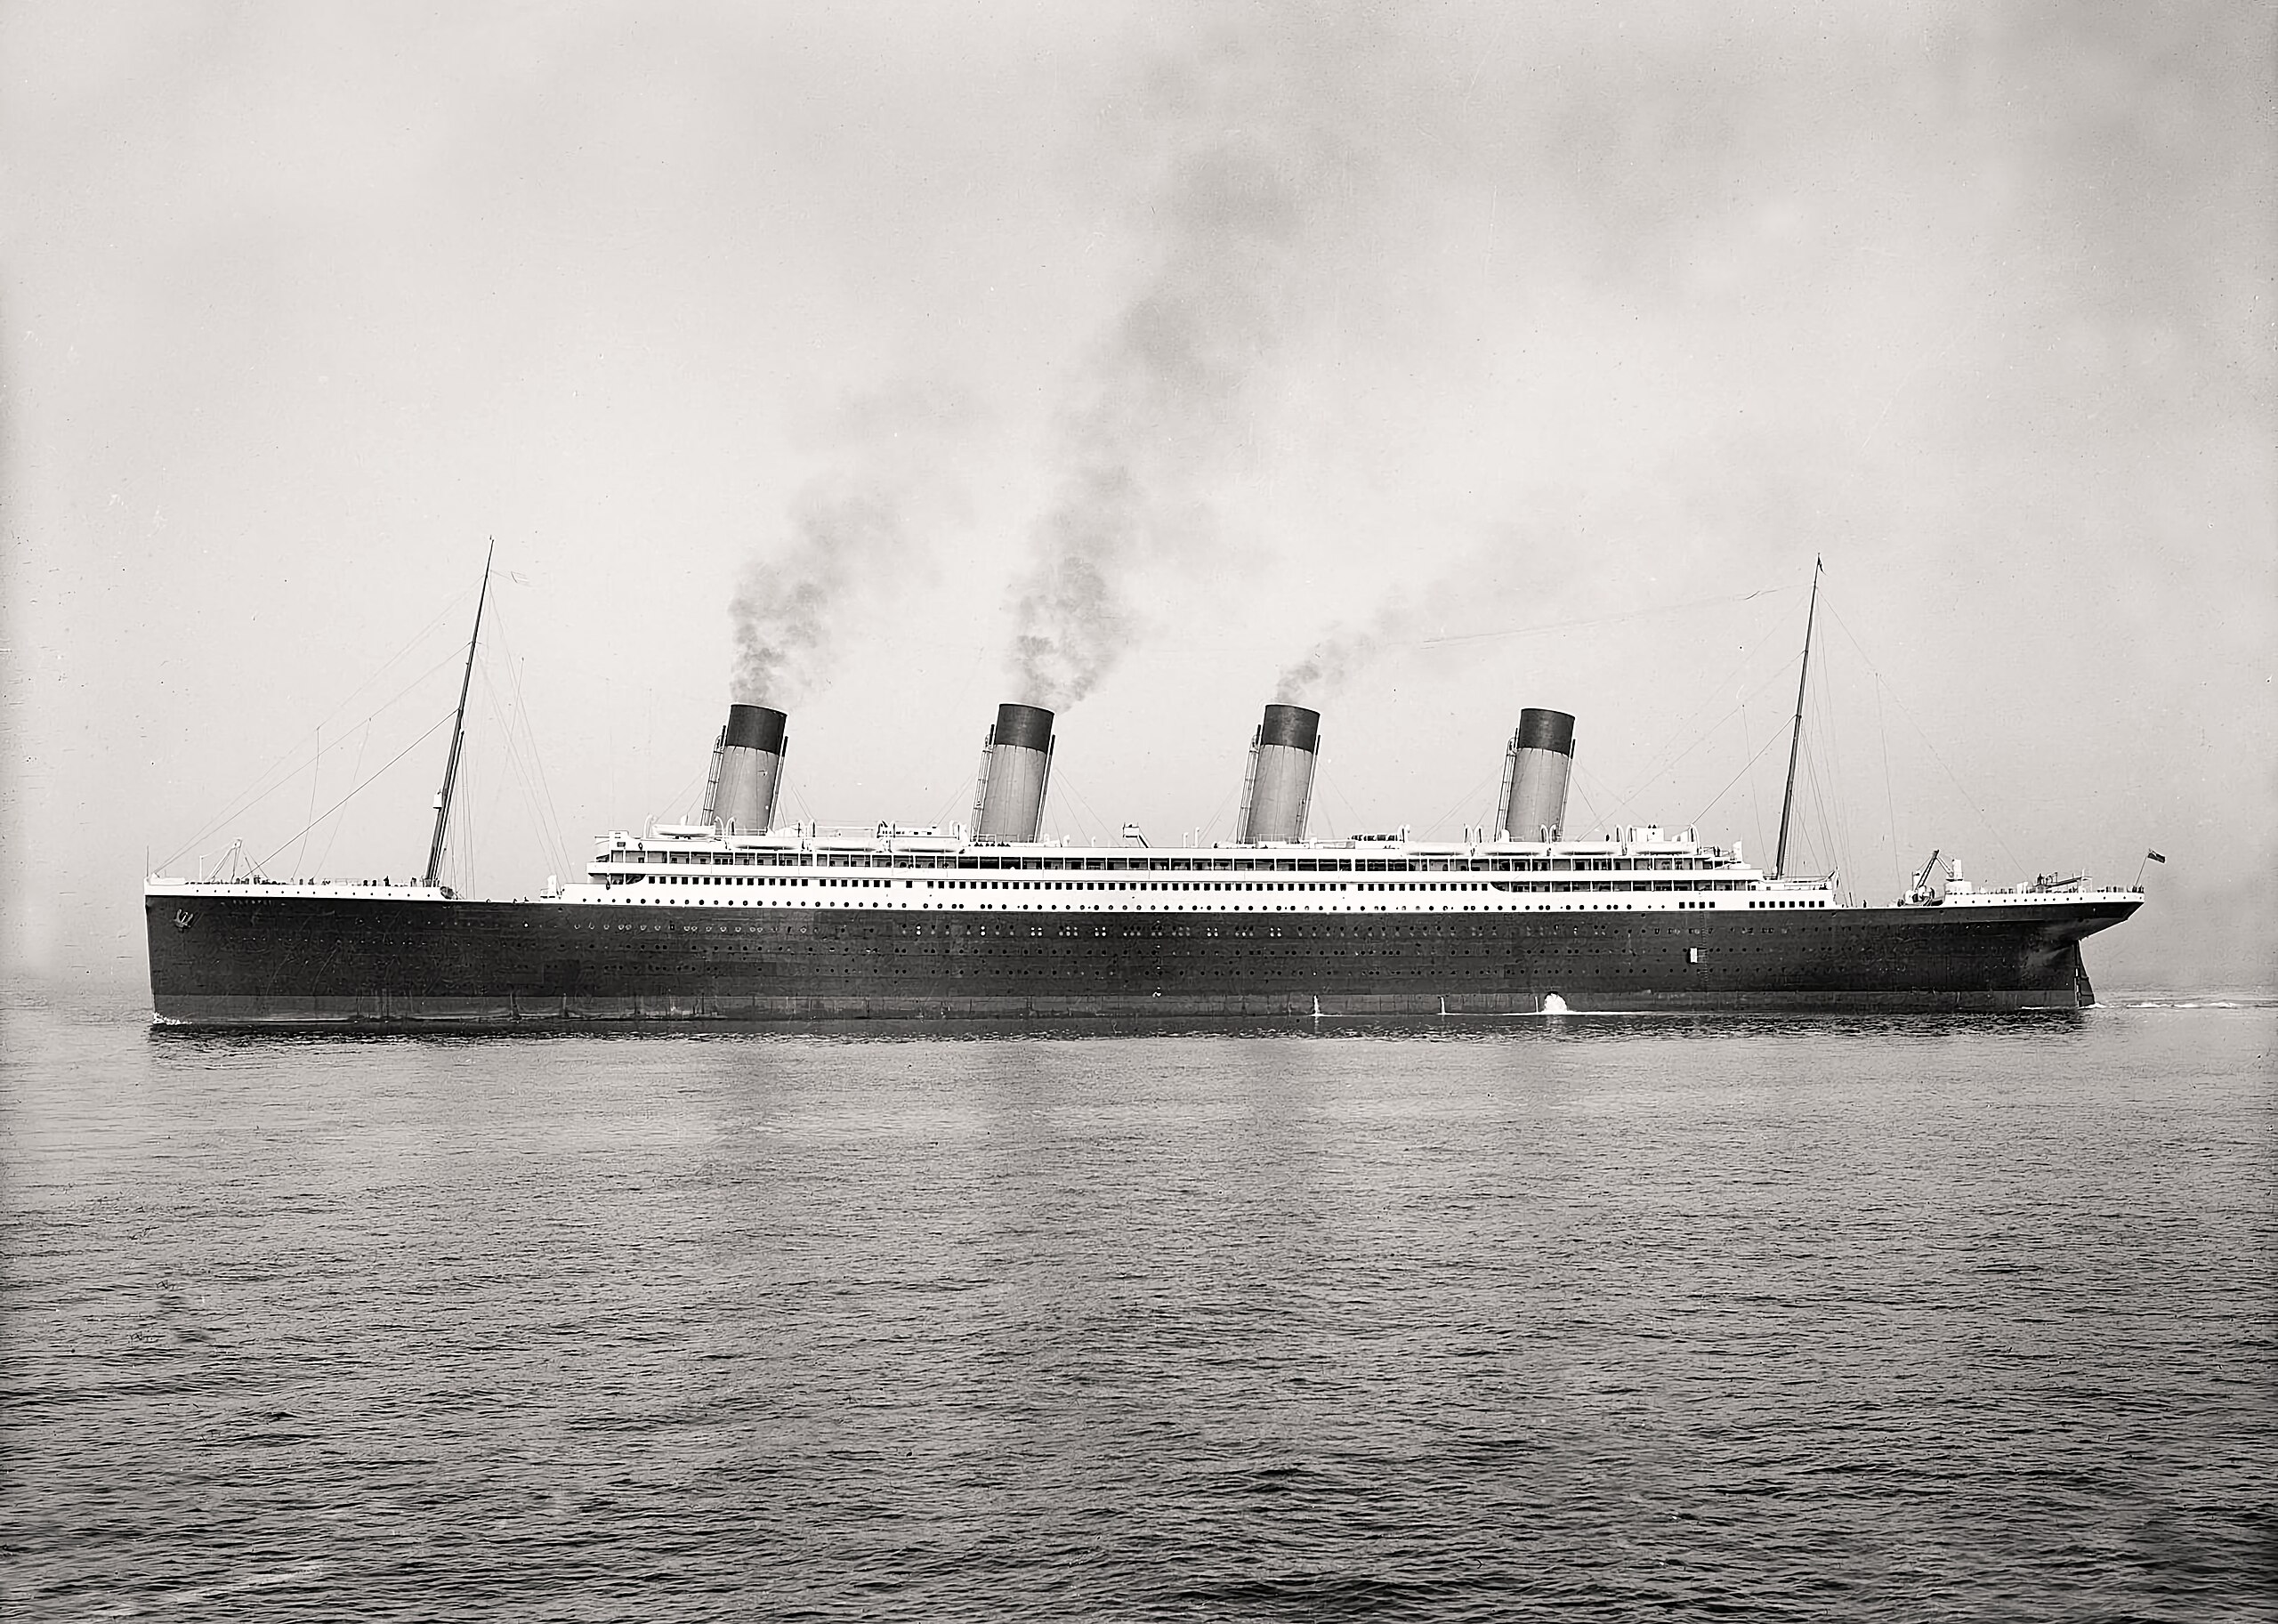 File:RMS Olympic Sea Trials in 1911.jpg - Wikimedia Commons